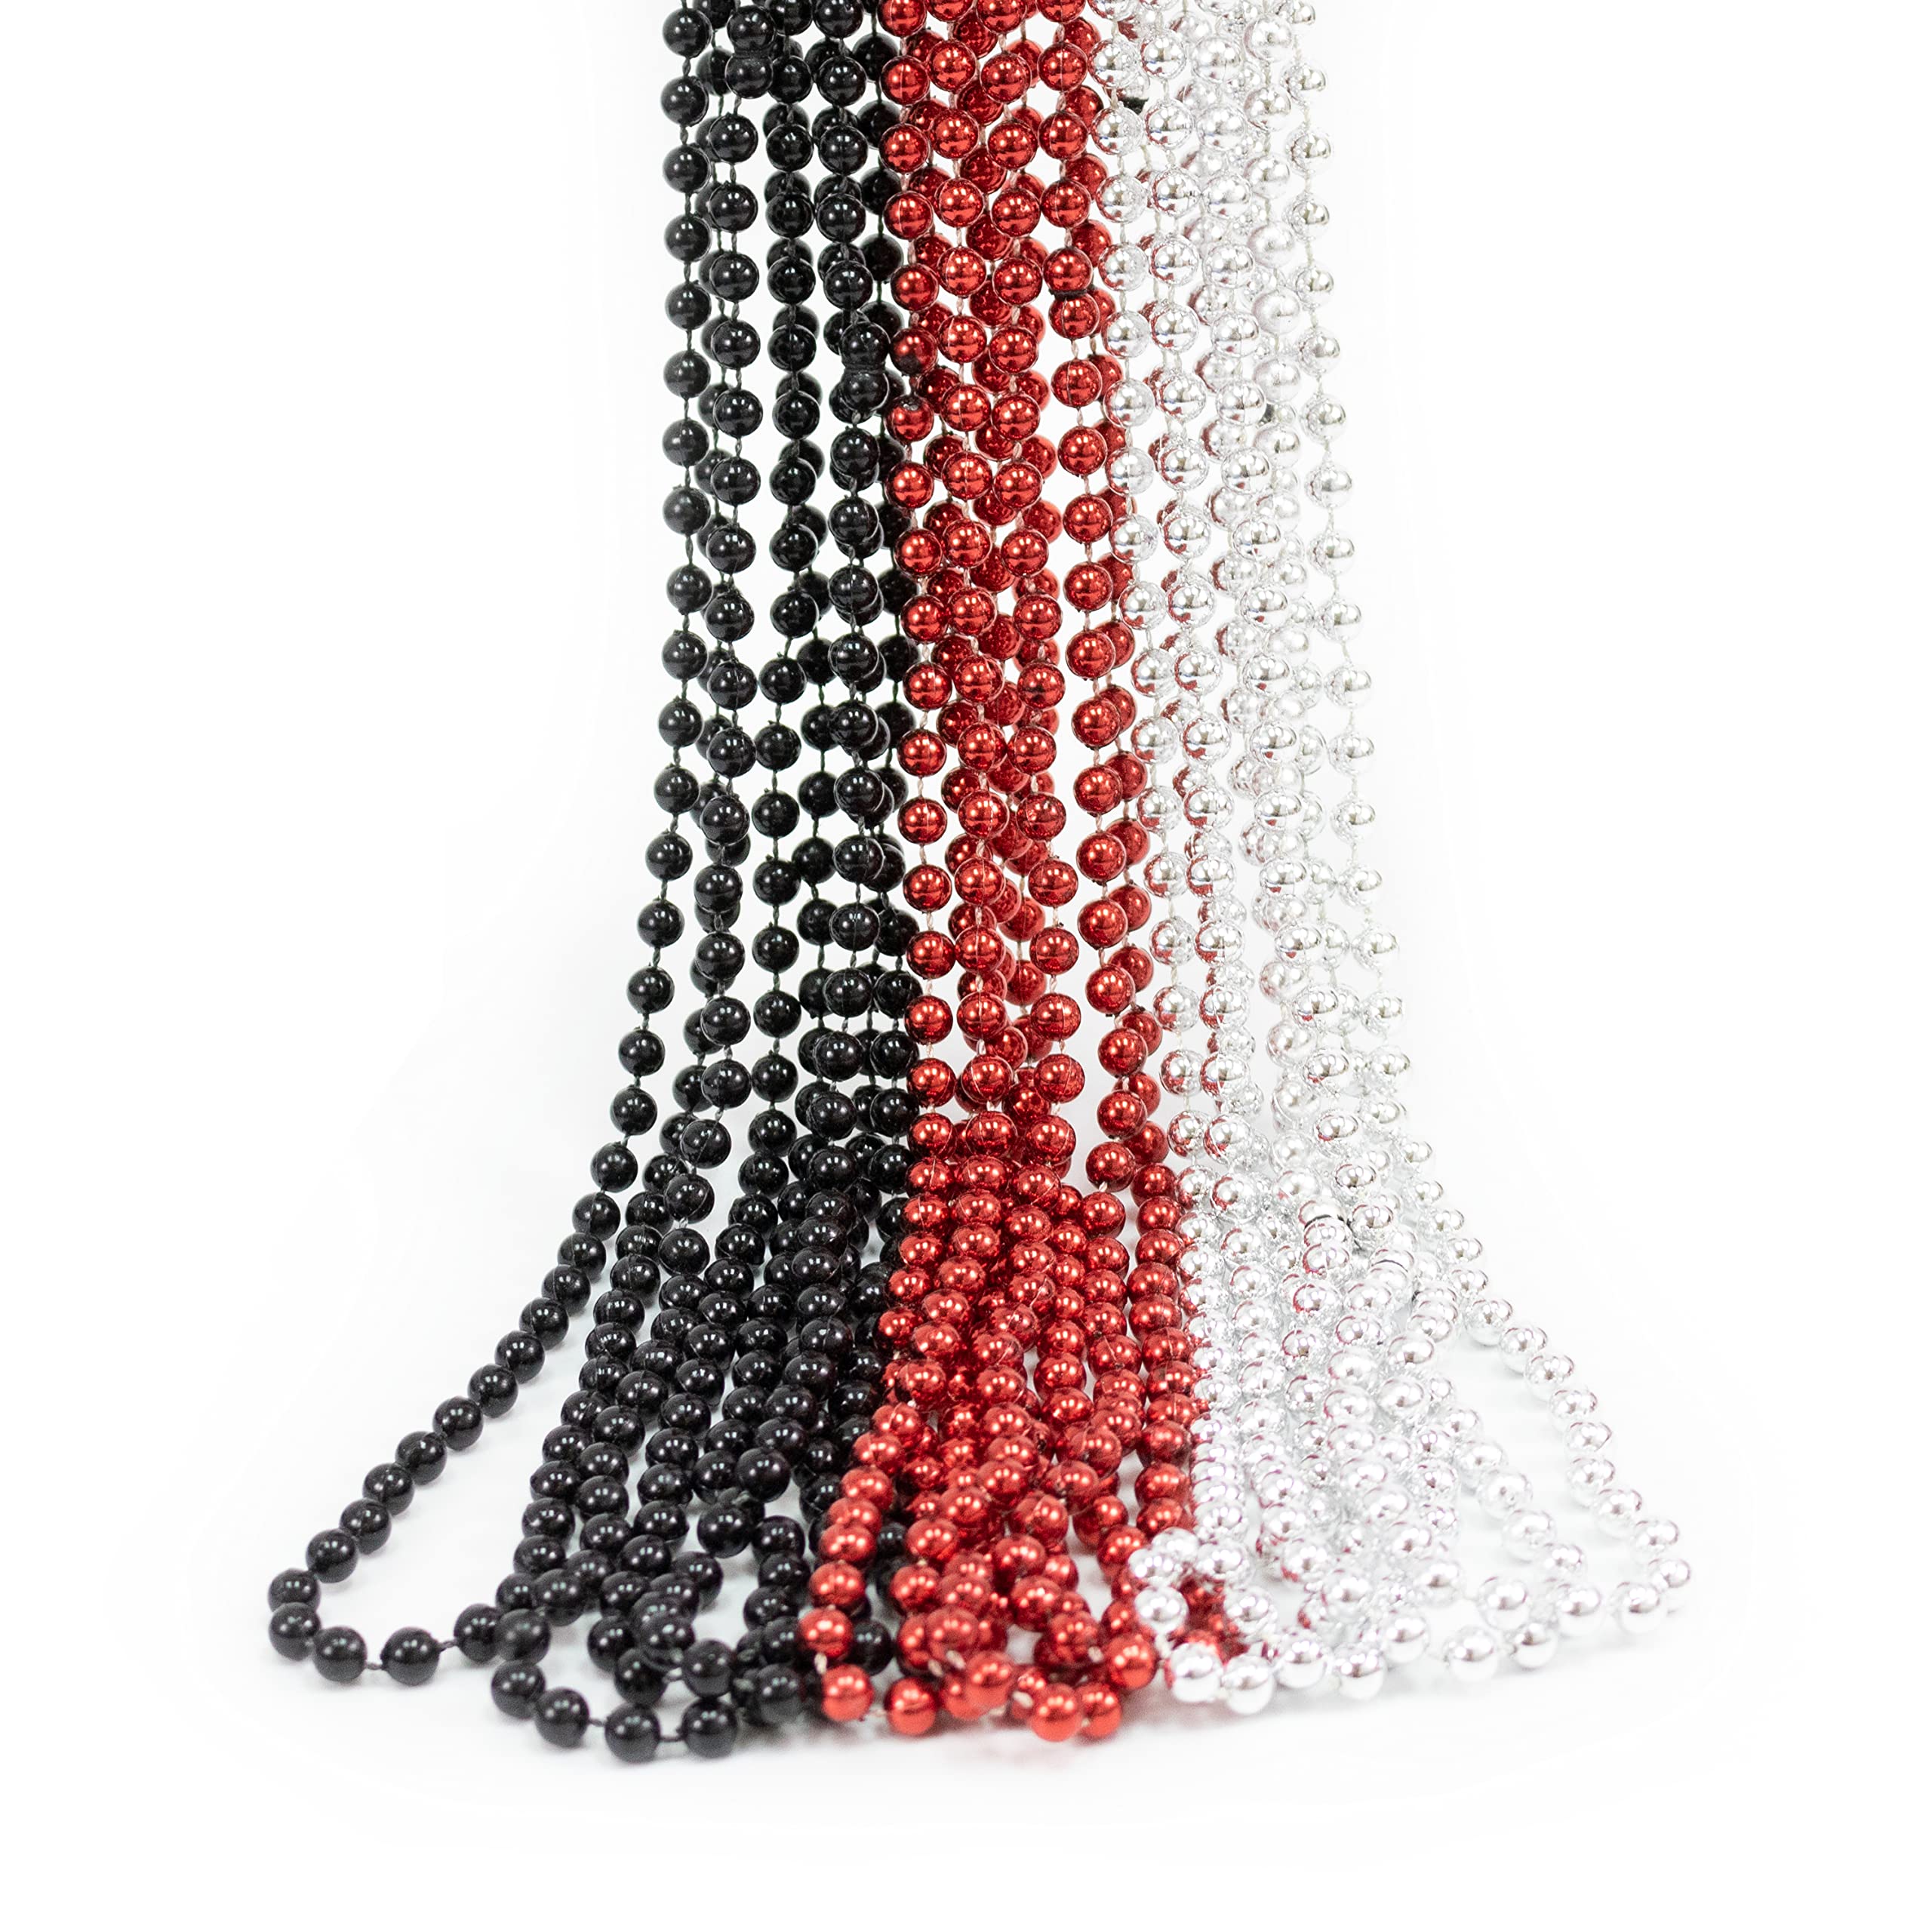 GIFTEXPRESS 12 pack of 33 Mardi Gras Beads Necklace, Metallic Red Black Silver Beaded Necklace, Mardi Gras Throws, Party Beads Costume Necklaces